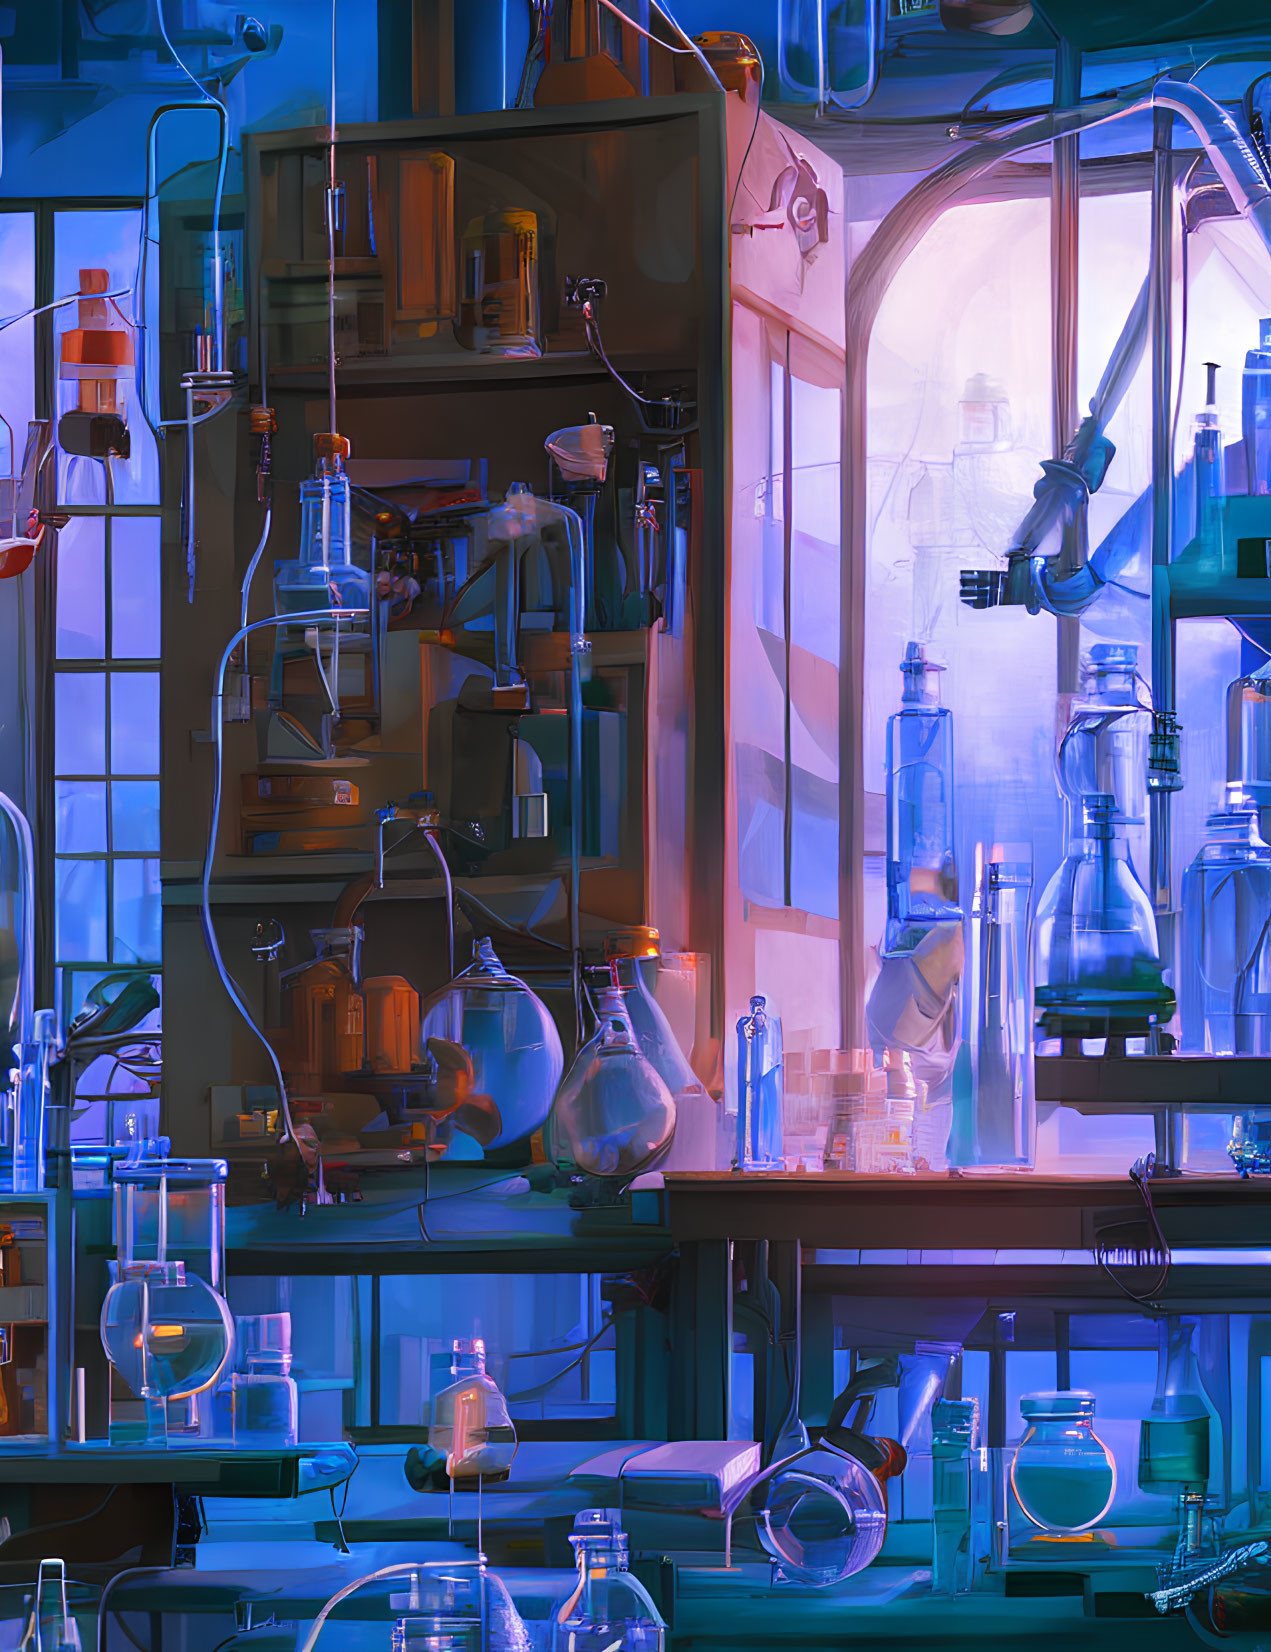 Colorful laboratory scene with glass containers and scientific equipment